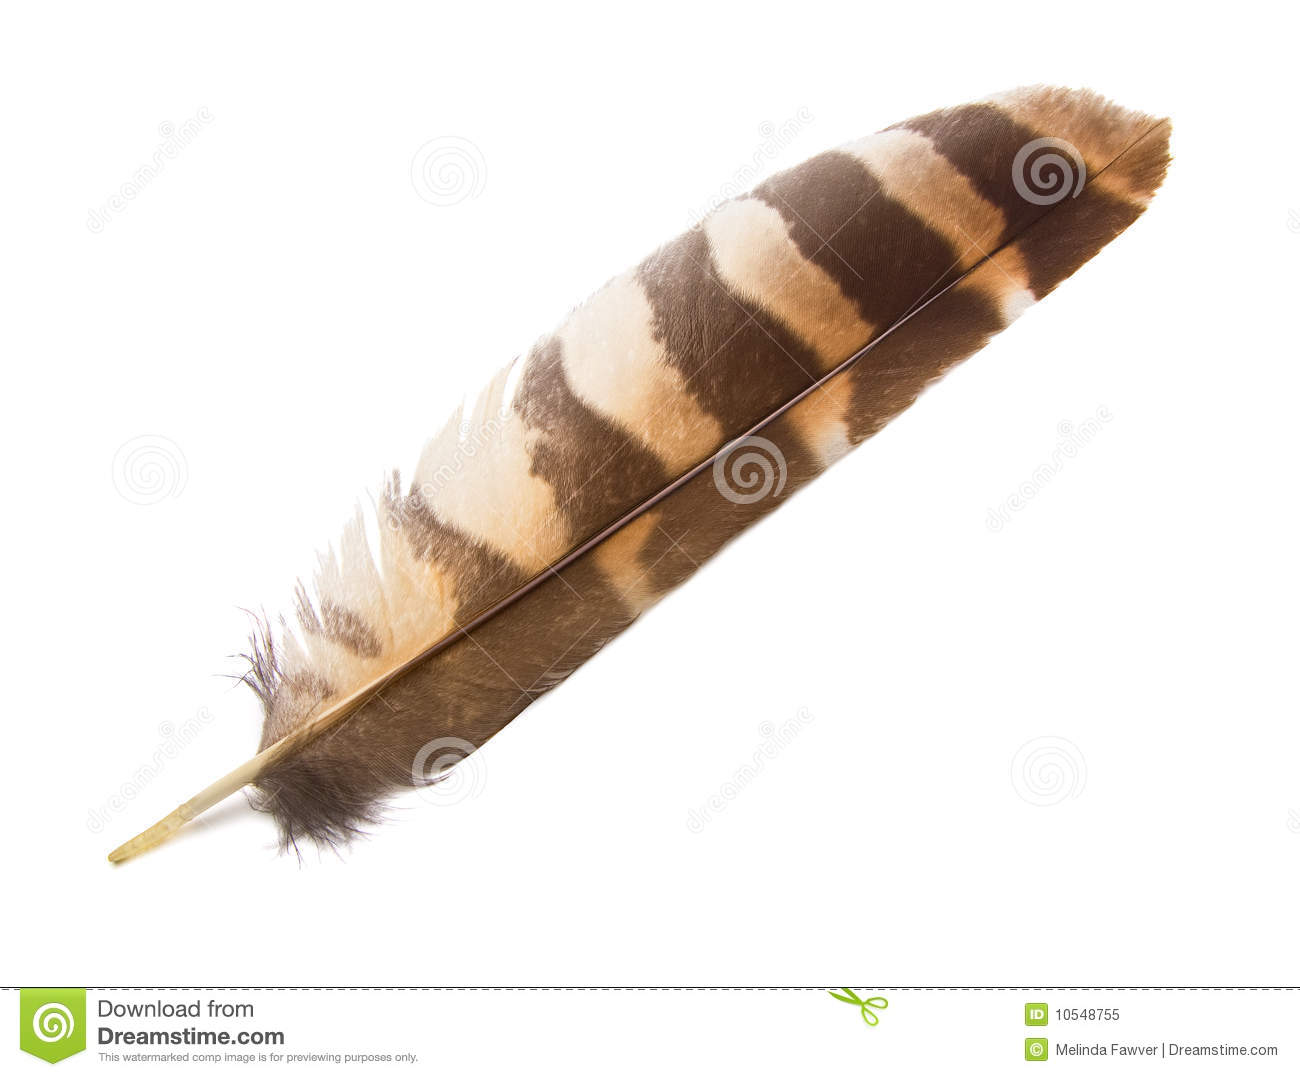 Owl Wing Feather Isolated Royalty Free Stock Photo   Image  10548755